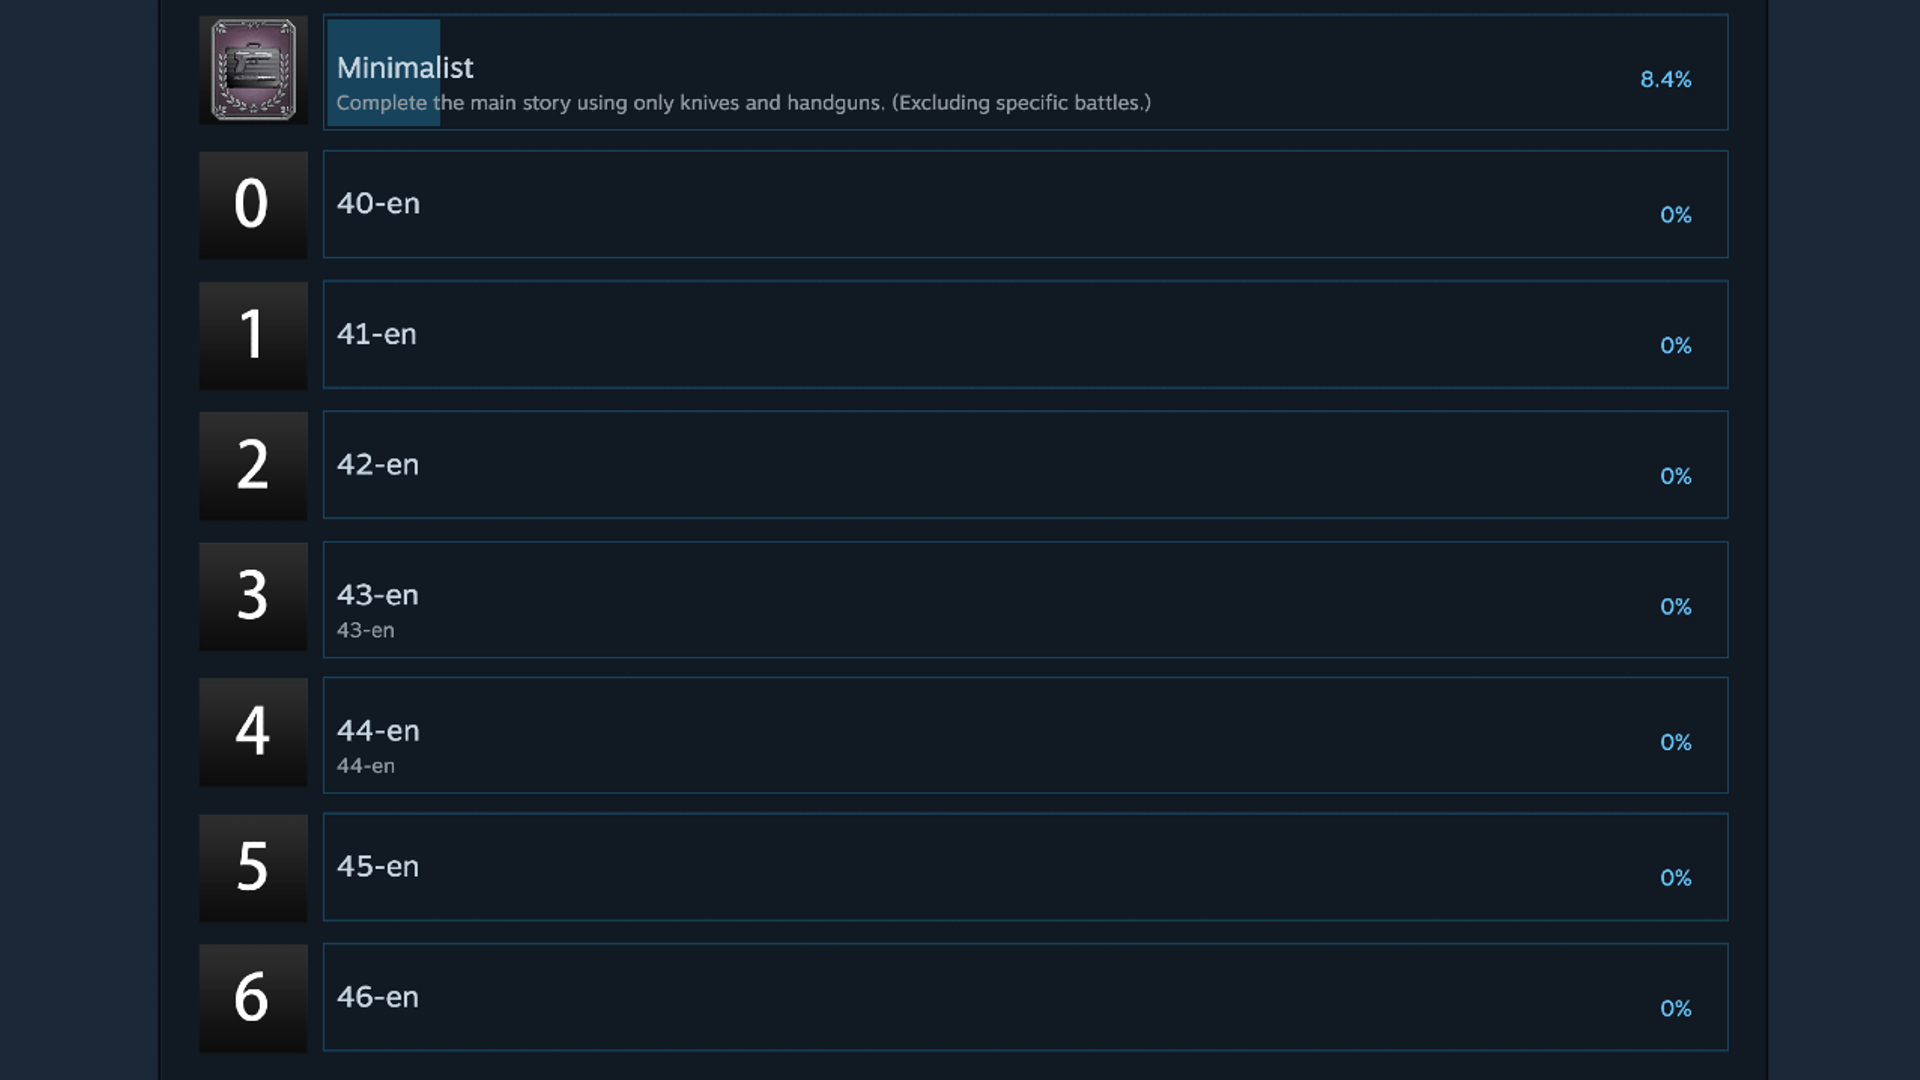 A screenshot of Resident Evil 4 Remake's achievements on Steam showing the cryptic new achievements 